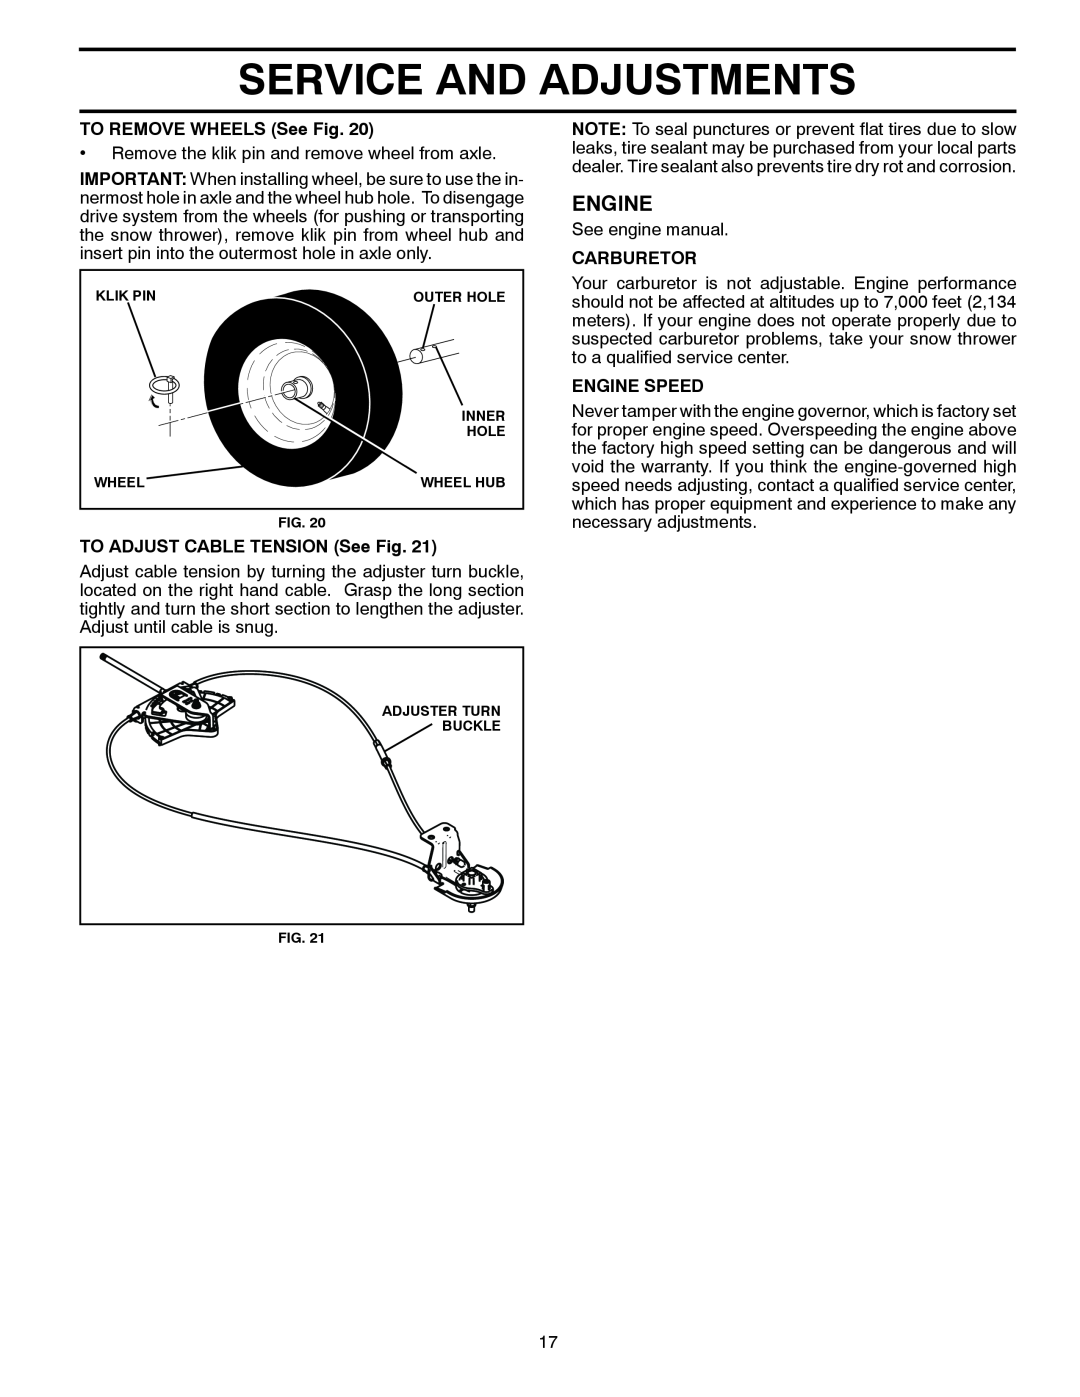 Poulan XT827ES Service And Adjustments, Engine, TO REMOVE WHEELS See Fig, TO ADJUST CABLE TENSION See Fig, Carburetor 